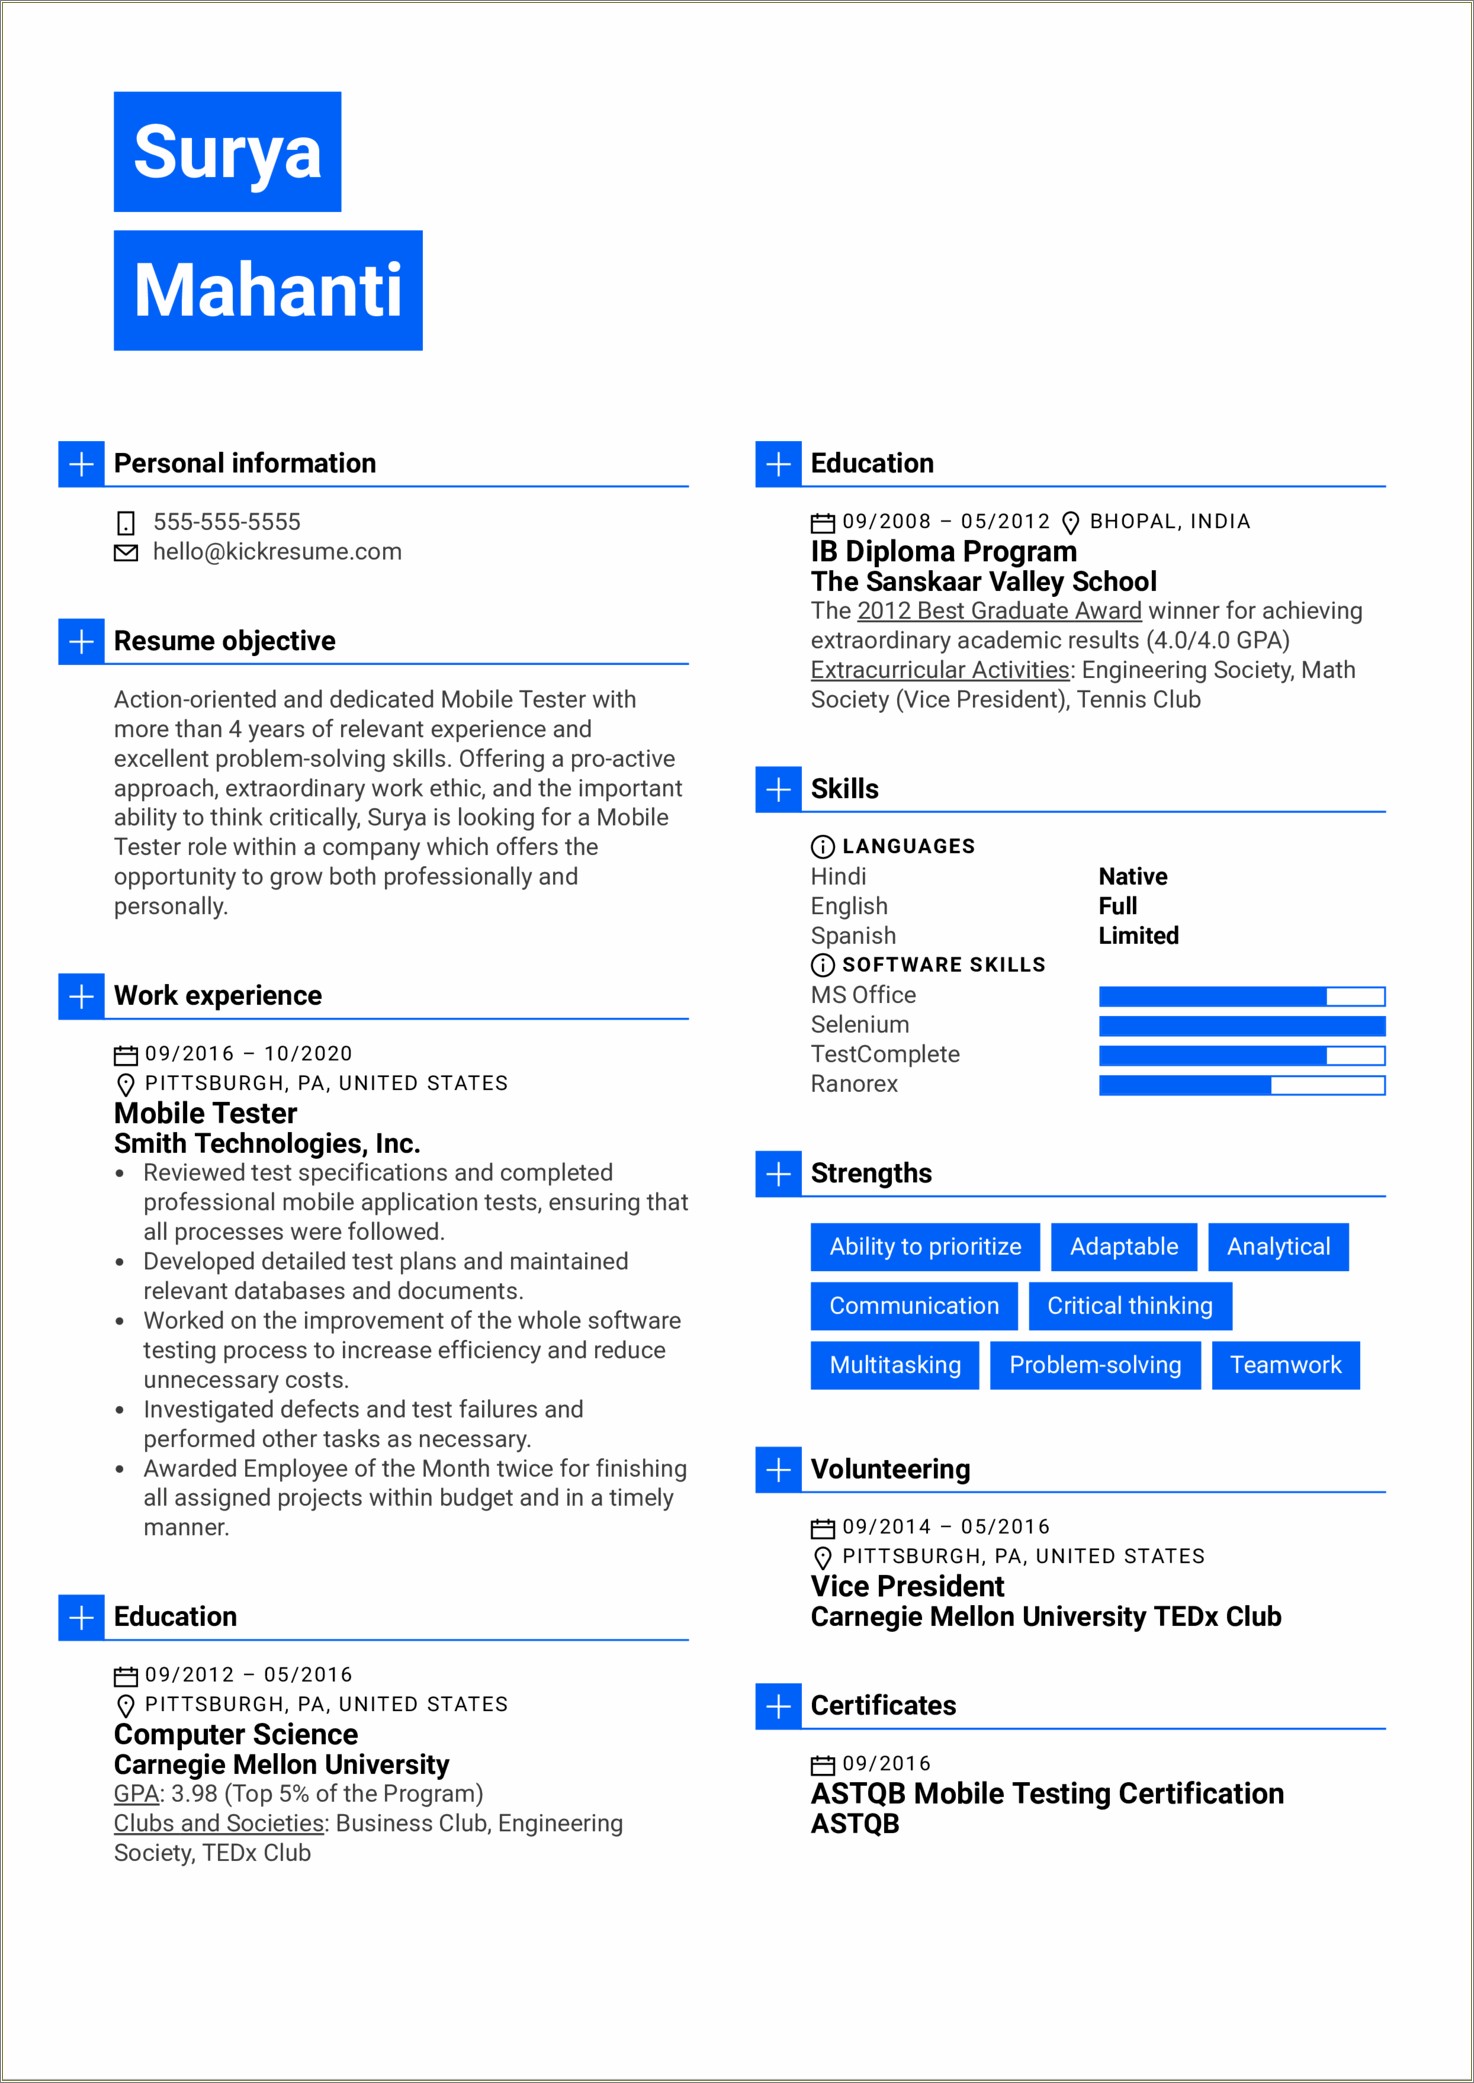 Example Resume For Computer Science Student